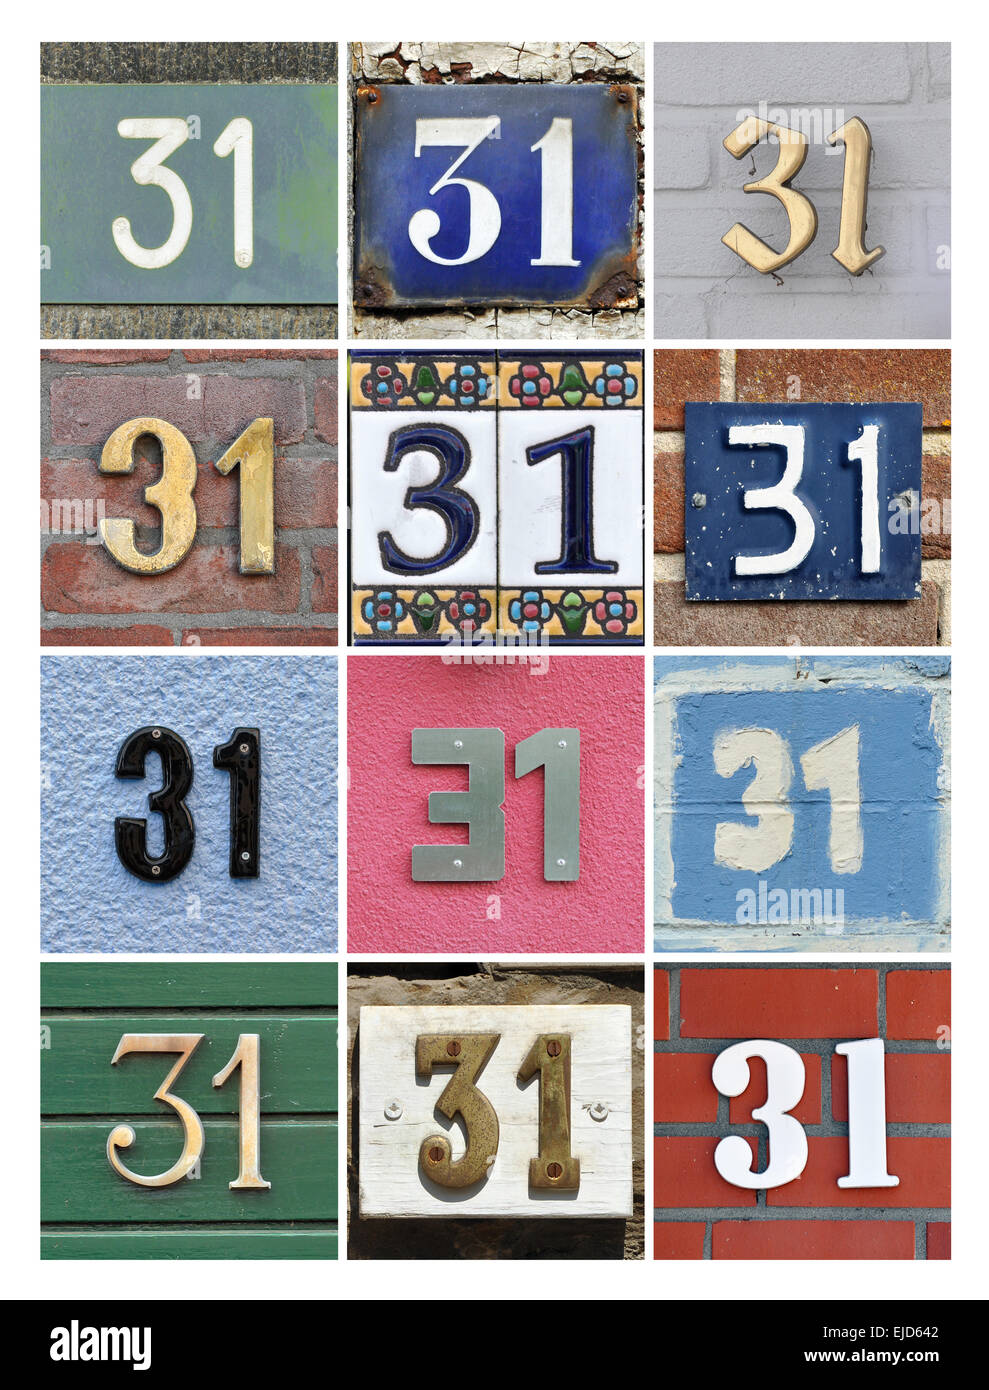 number-31-collage-of-house-numbers-thirty-one-stock-photo-80195474-alamy